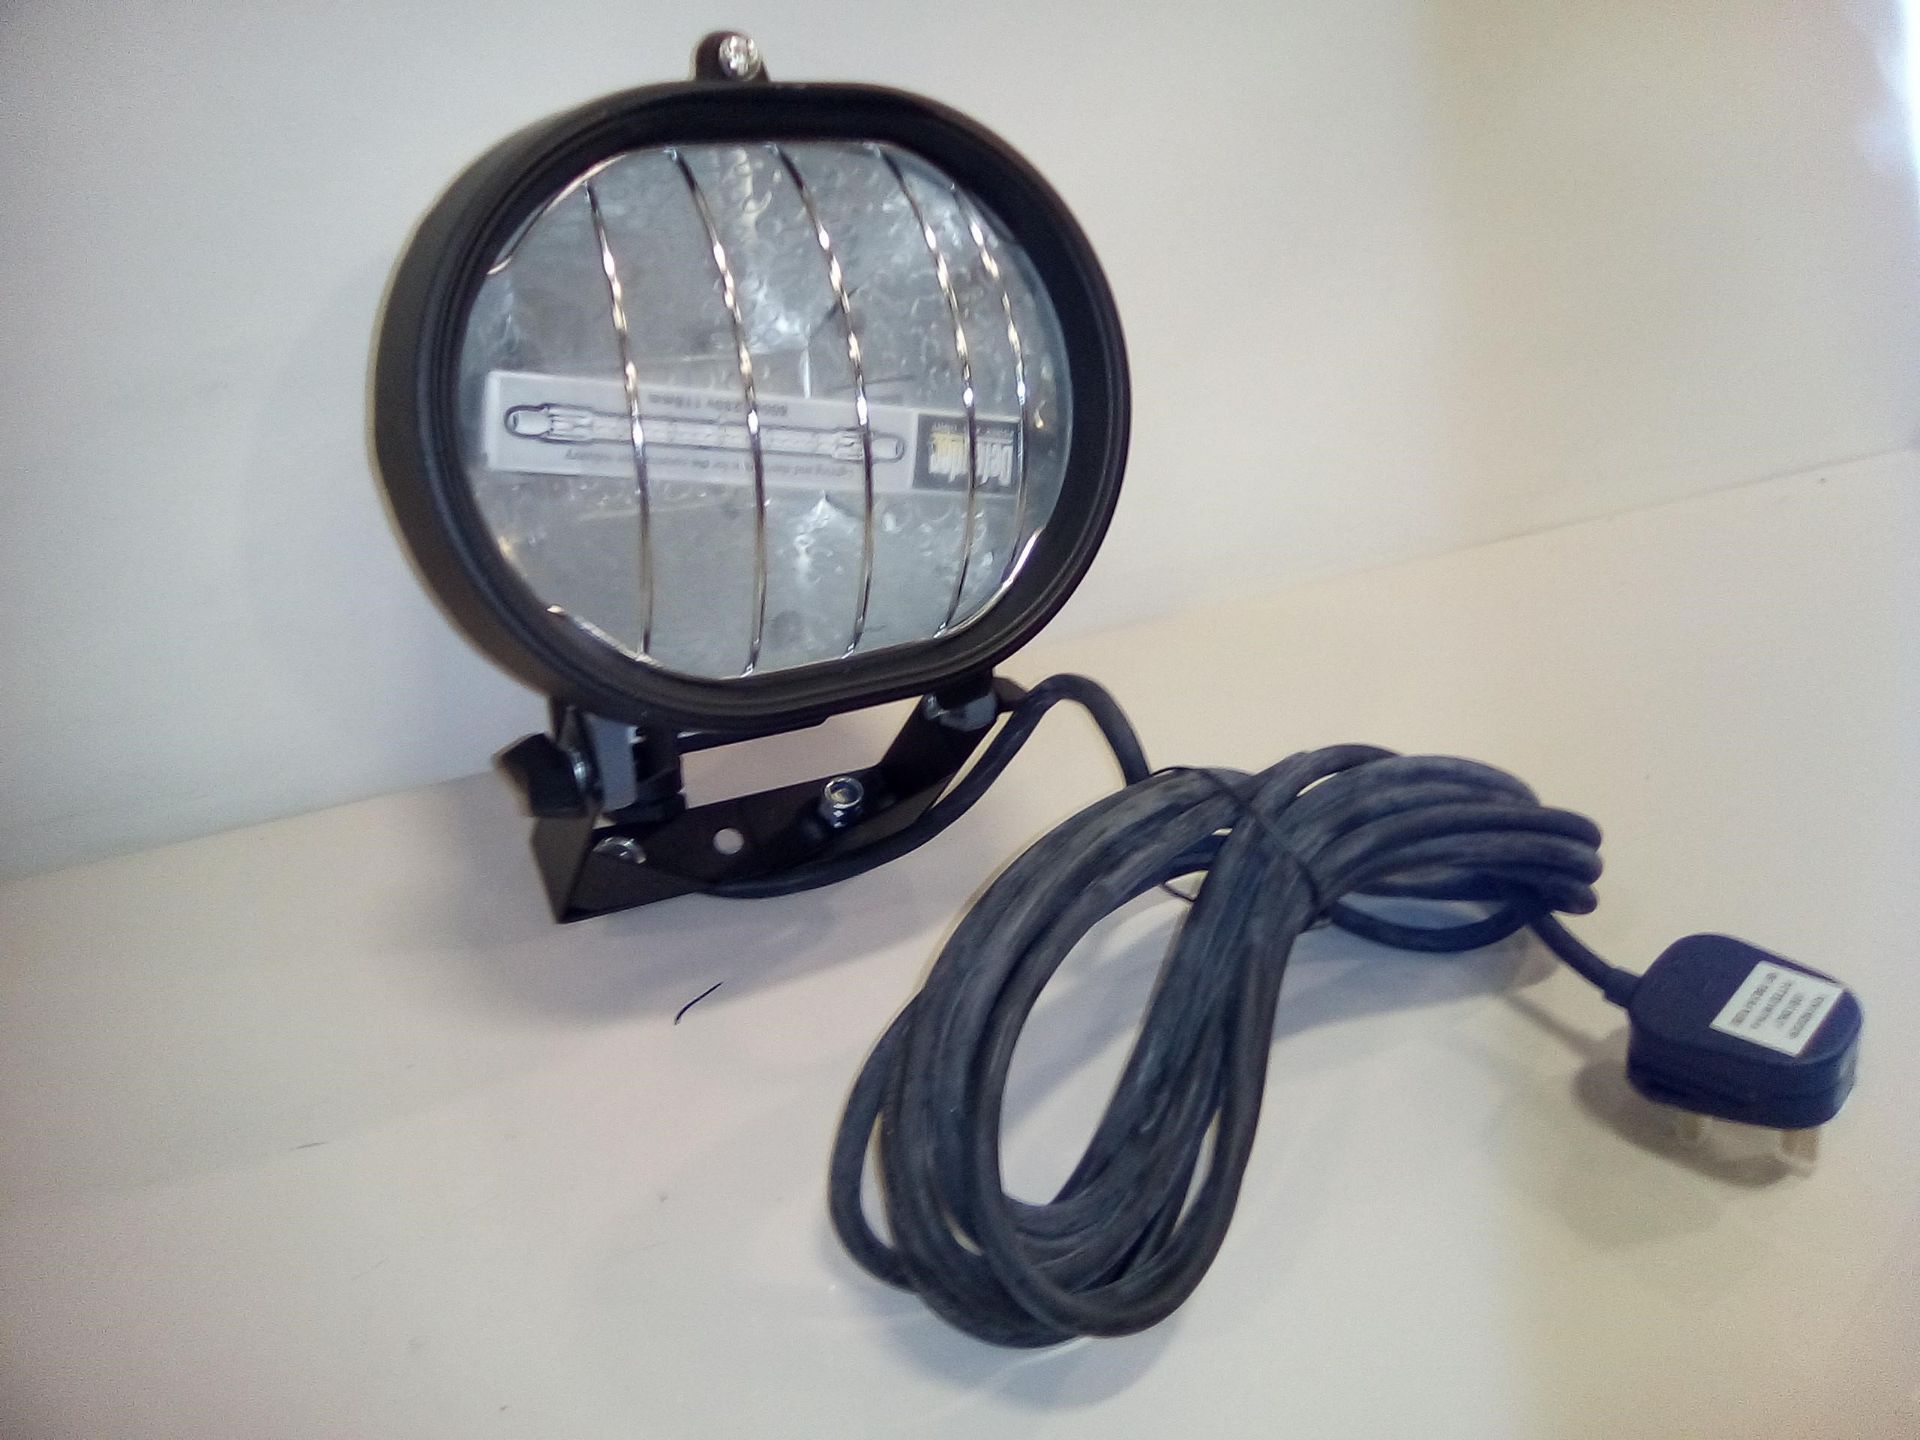 20 X BRAND NEW DEFENDER 240V HALOGEN HEAD PORTABLE SITE LAMPS / WORKLIGHTS WITH 5M CABLE, 13A